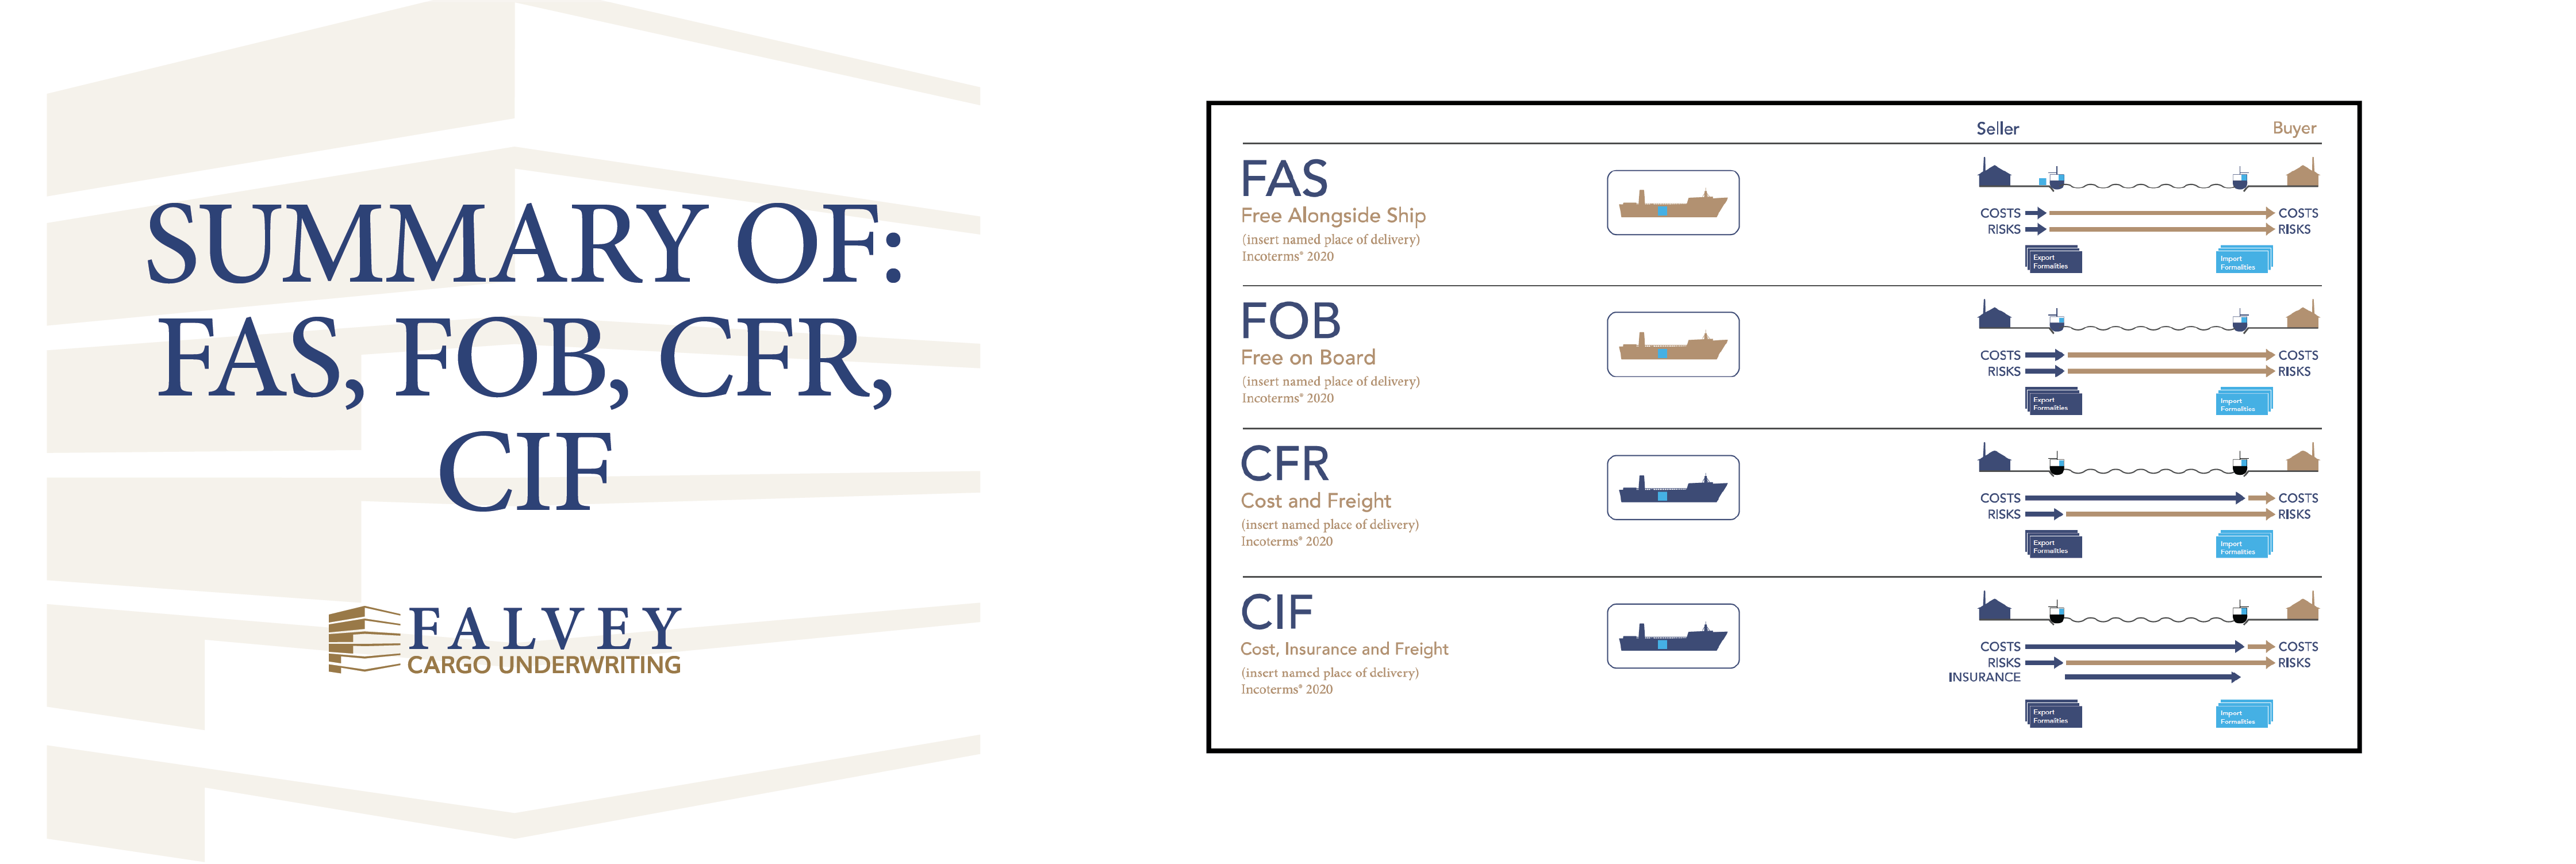 summary of FAS, FOB, CFR, CIF banner